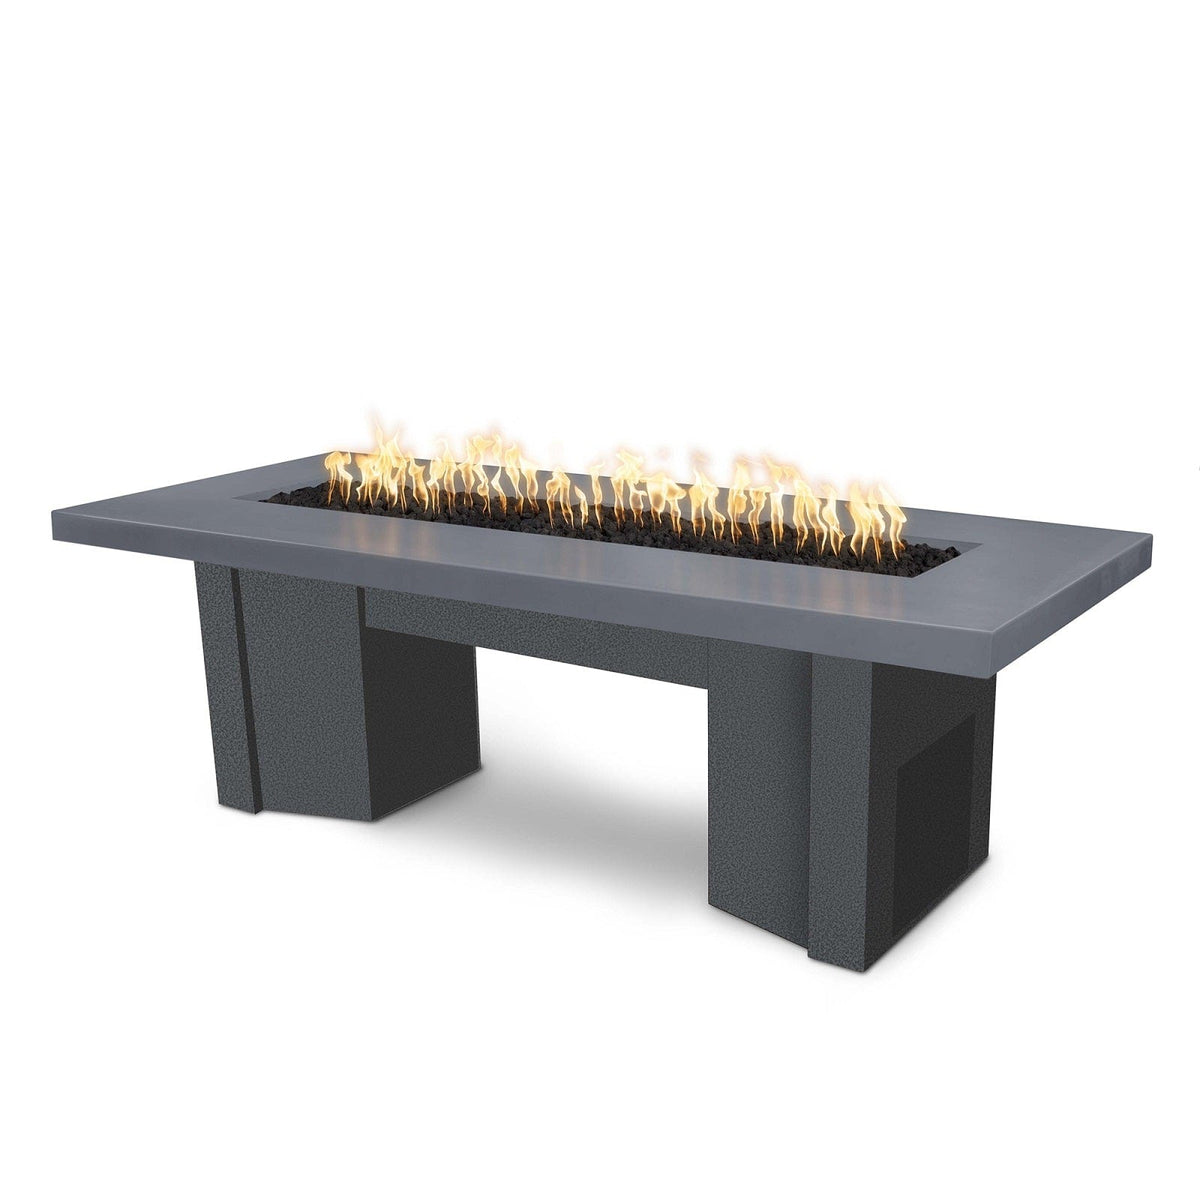 The Outdoor Plus Fire Features Gray (-GRY) / Silver Vein Powder Coated Steel (-SLV) The Outdoor Plus 60&quot; Alameda Fire Table Smooth Concrete in Natural Gas - Match Lit / OPT-ALMGFRC60-NG